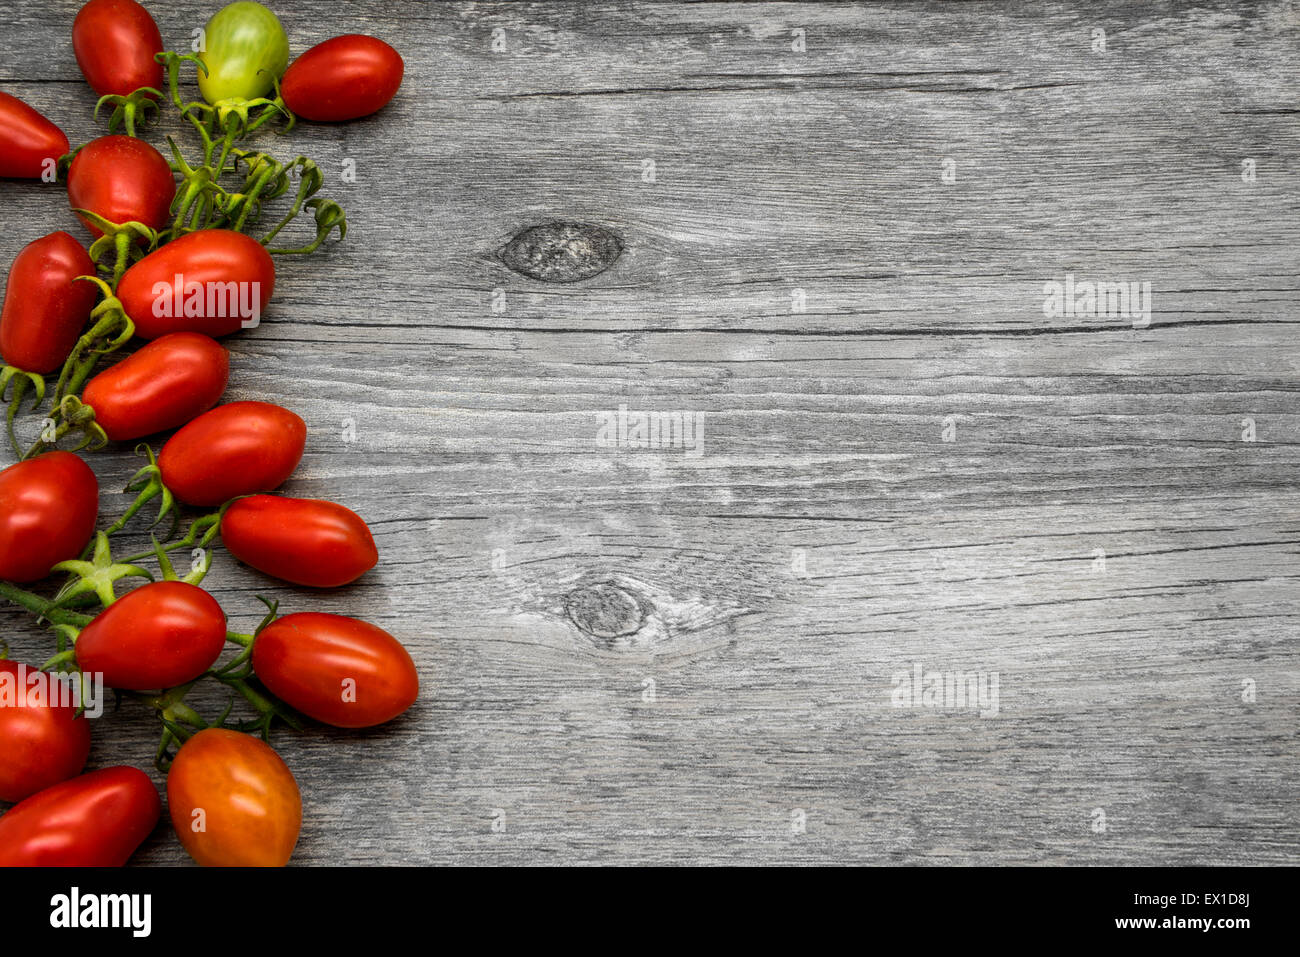 Cherry tomatoes on a gray wooden table. Vegetable border. Stock Photo